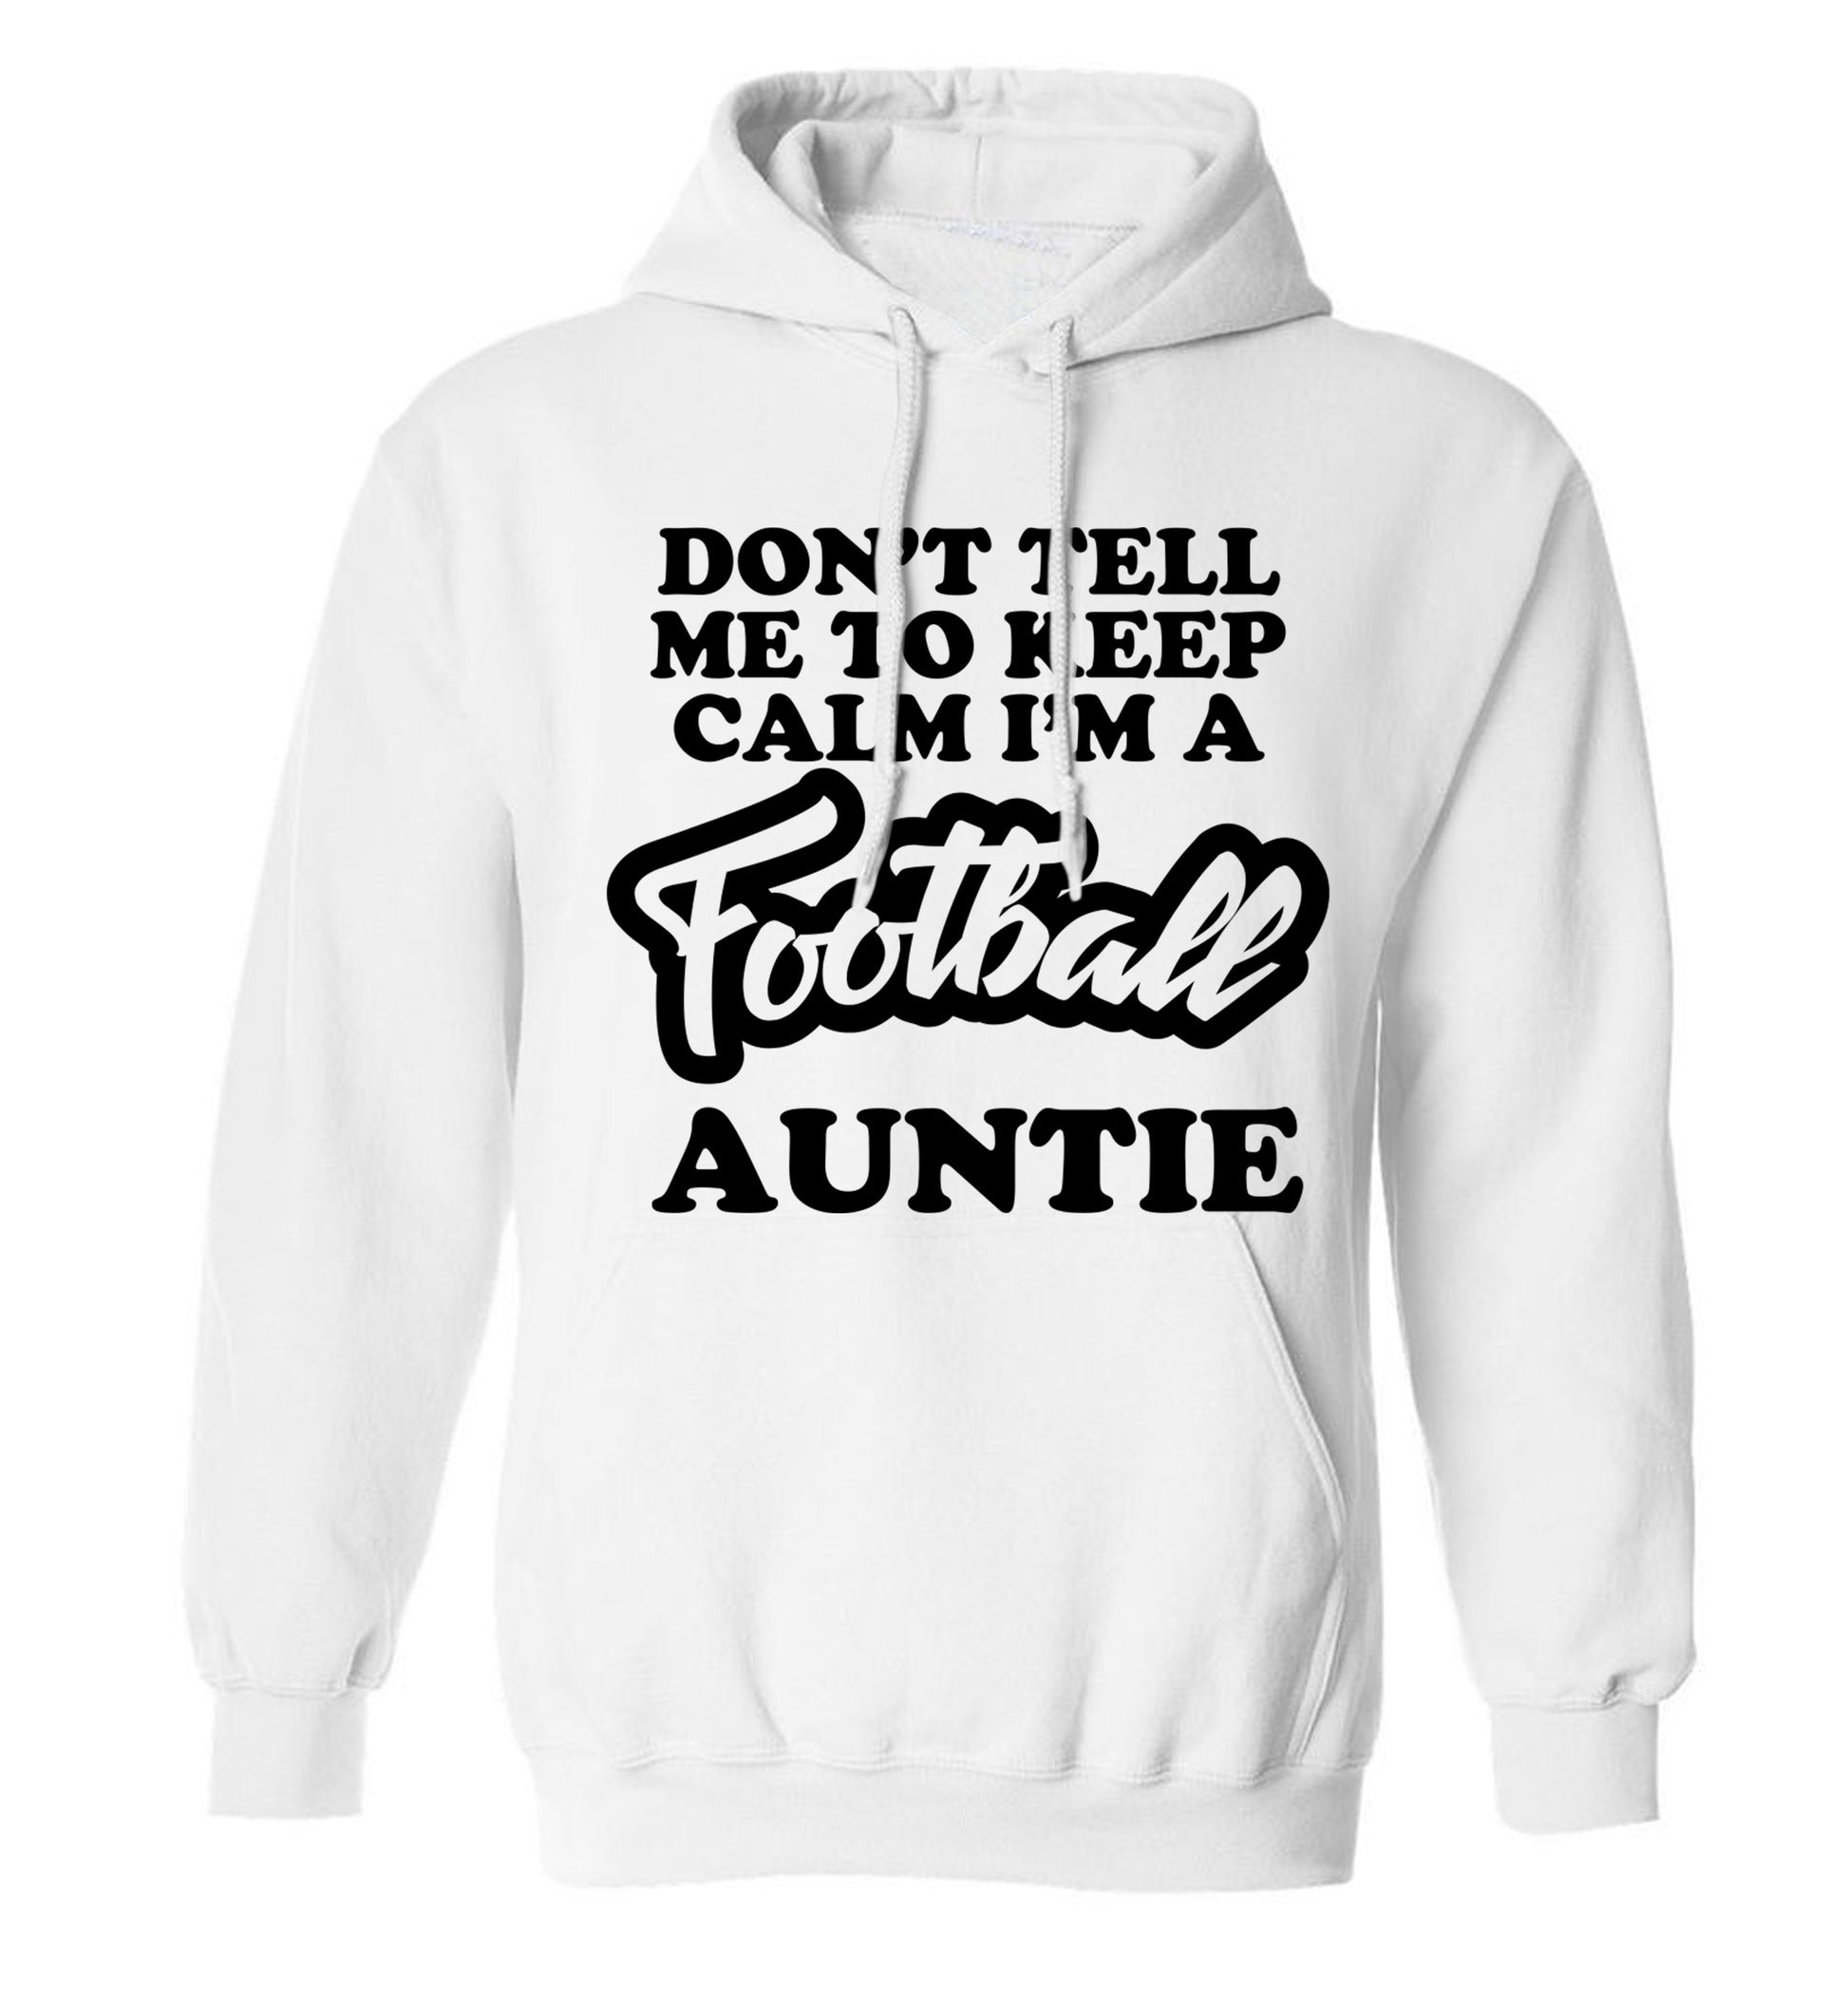 Don't tell me to keep calm I'm a football auntie adults unisexwhite hoodie 2XL